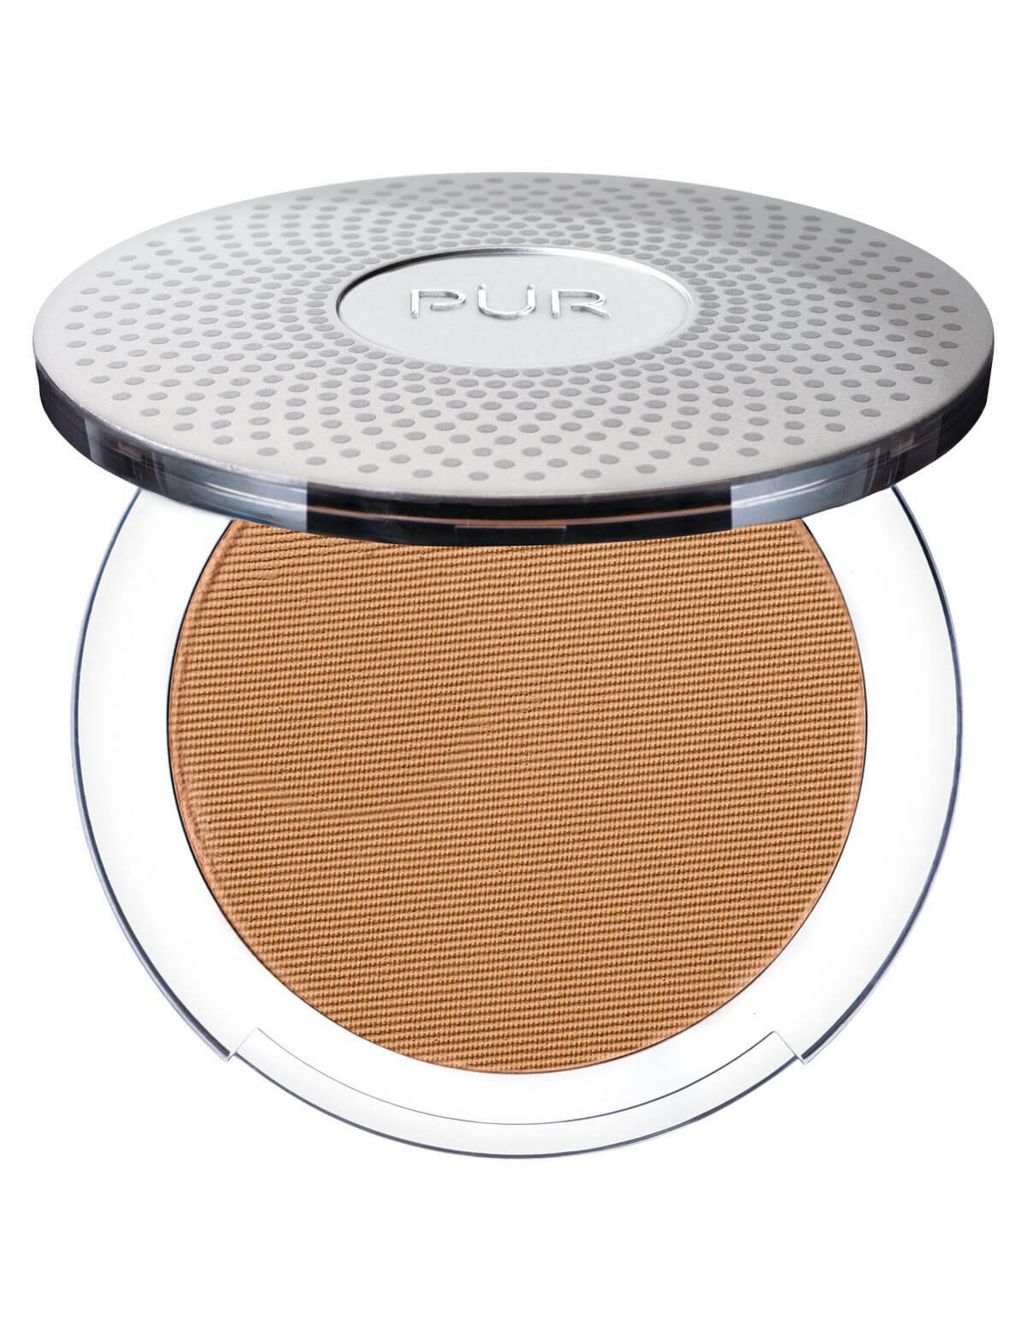 4-in-1 Pressed Mineral Make Up Compact 8g